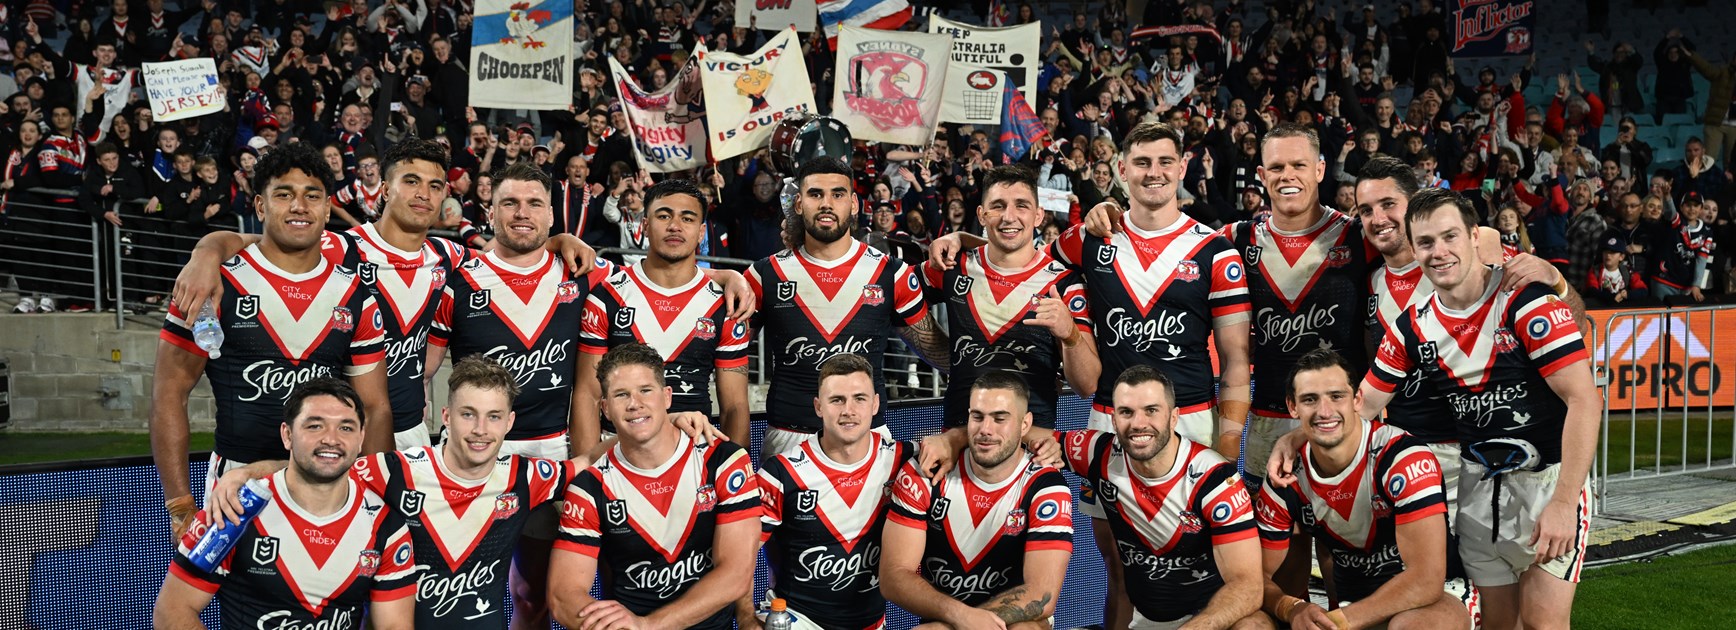 'We can go all the way': Roosters set to be team finals rivals fear